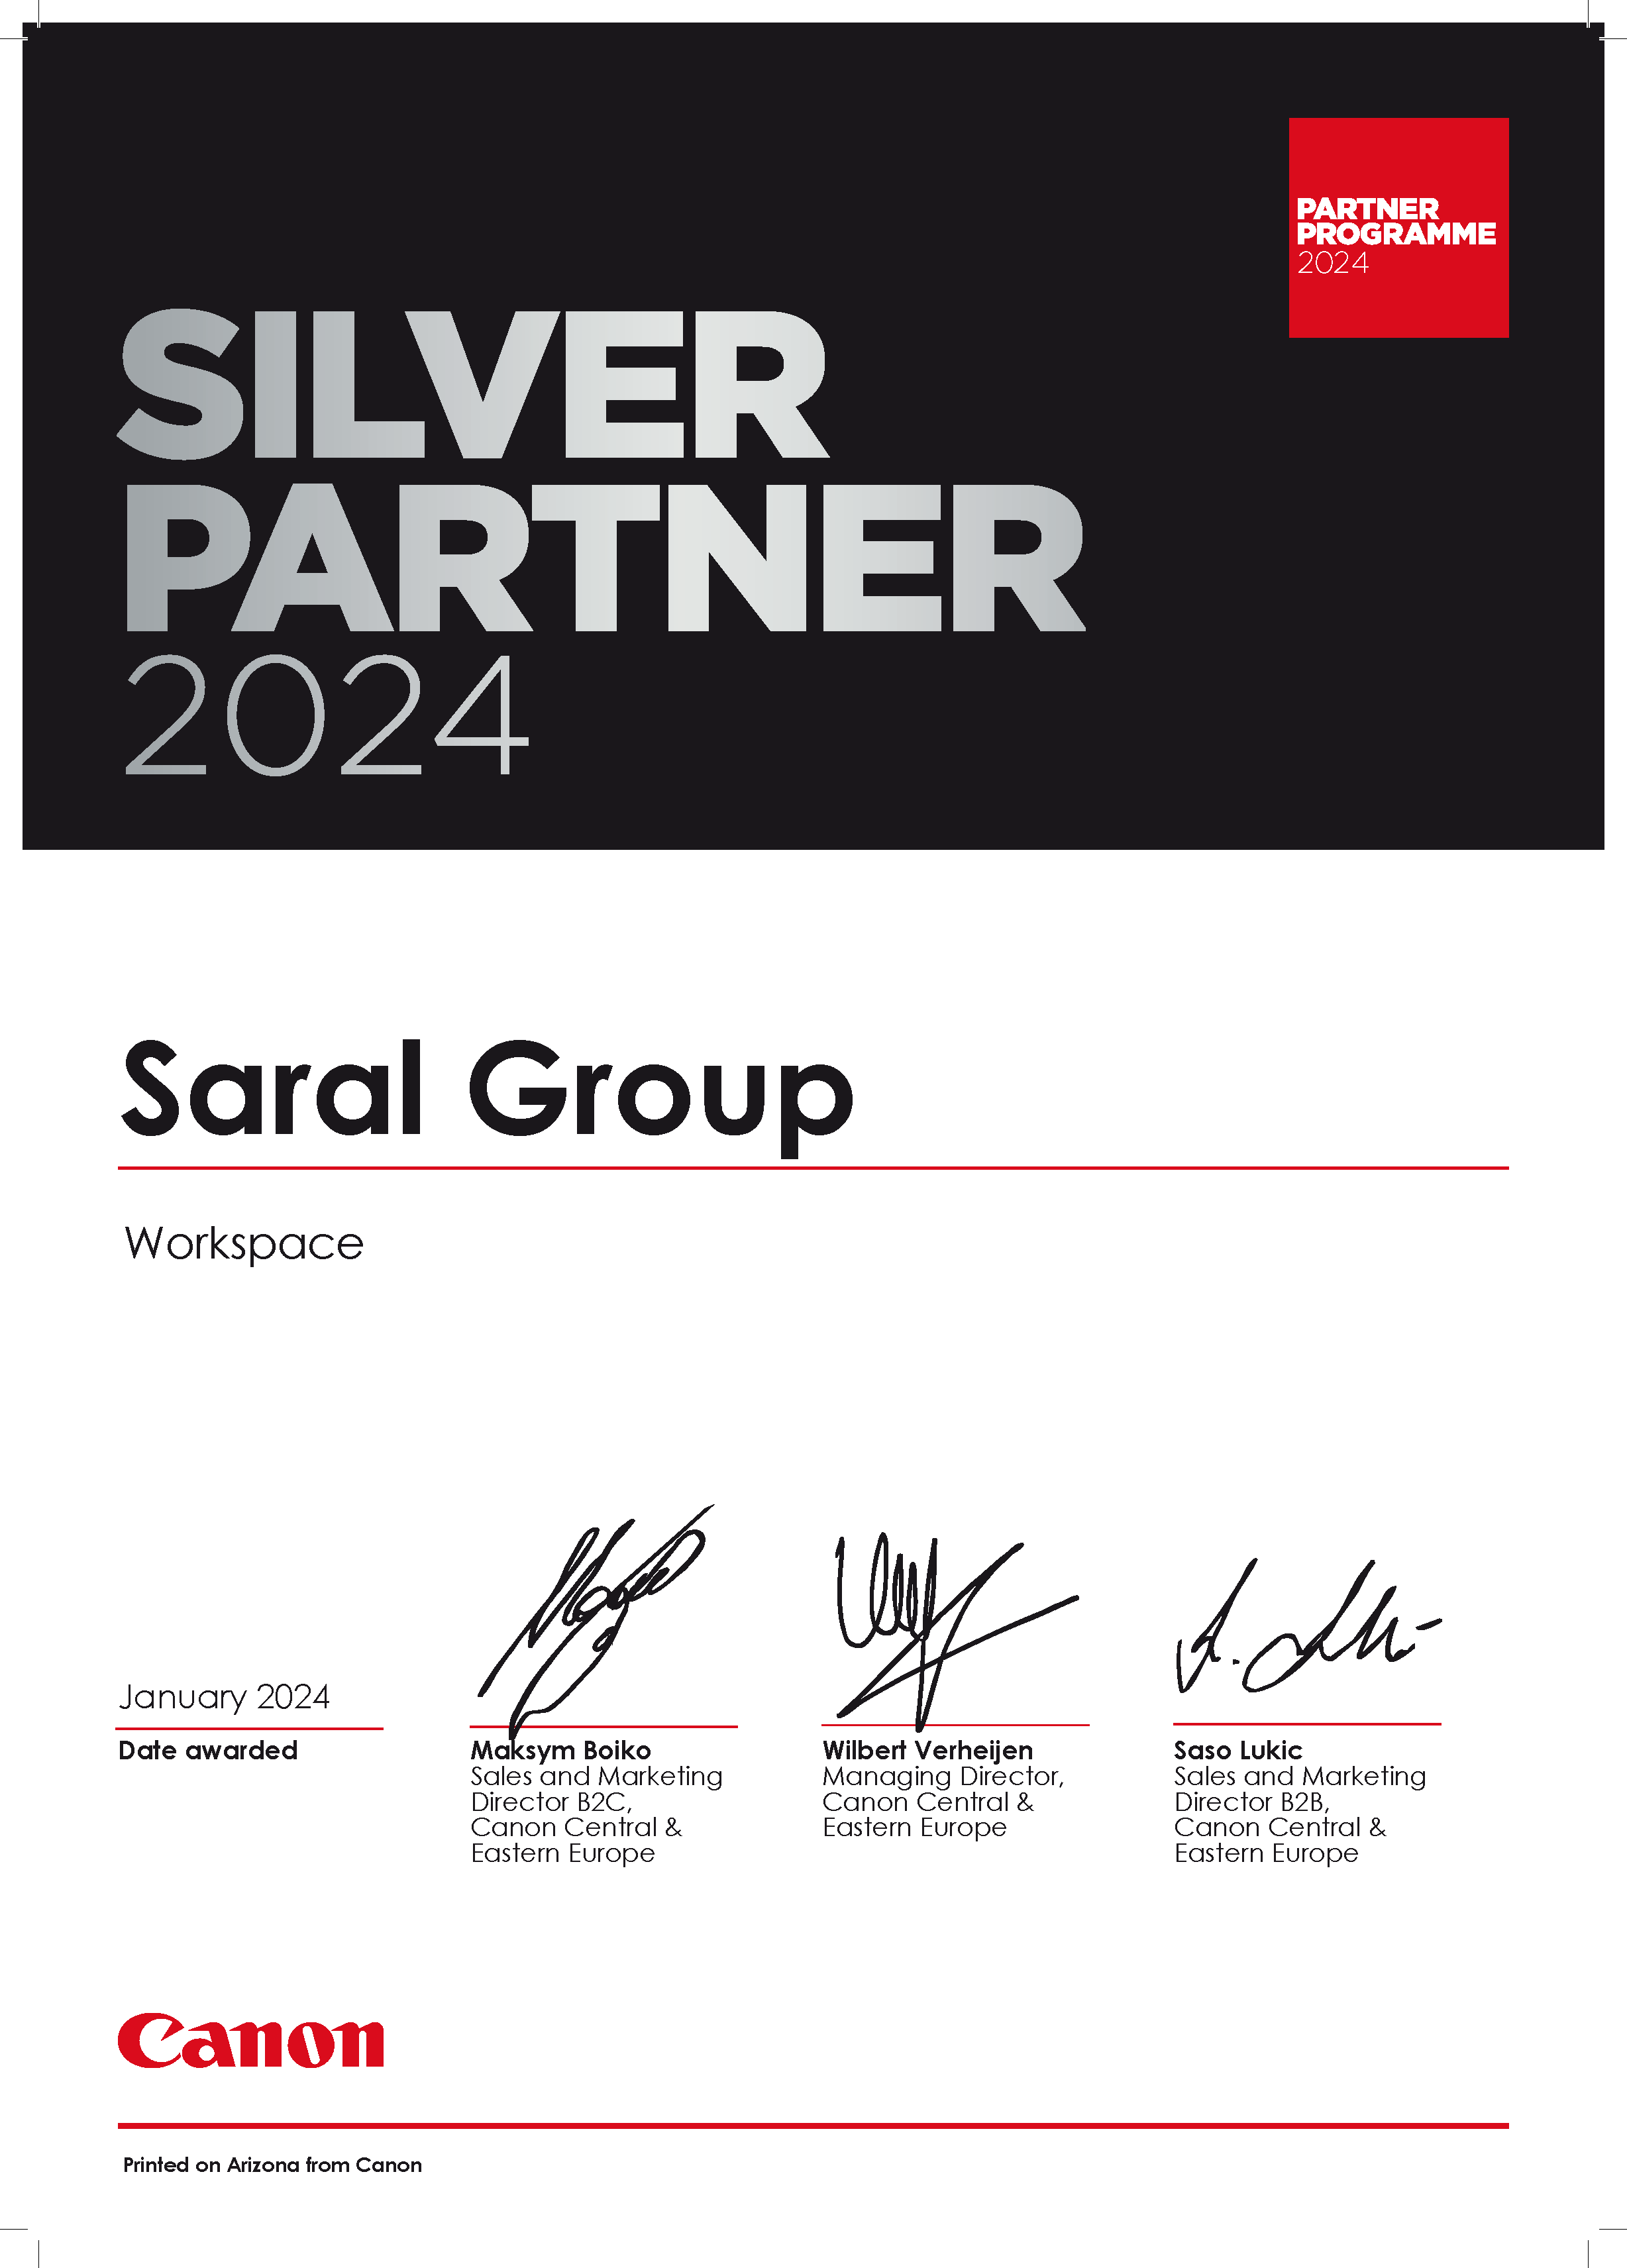 Canon - Saral Group 2024